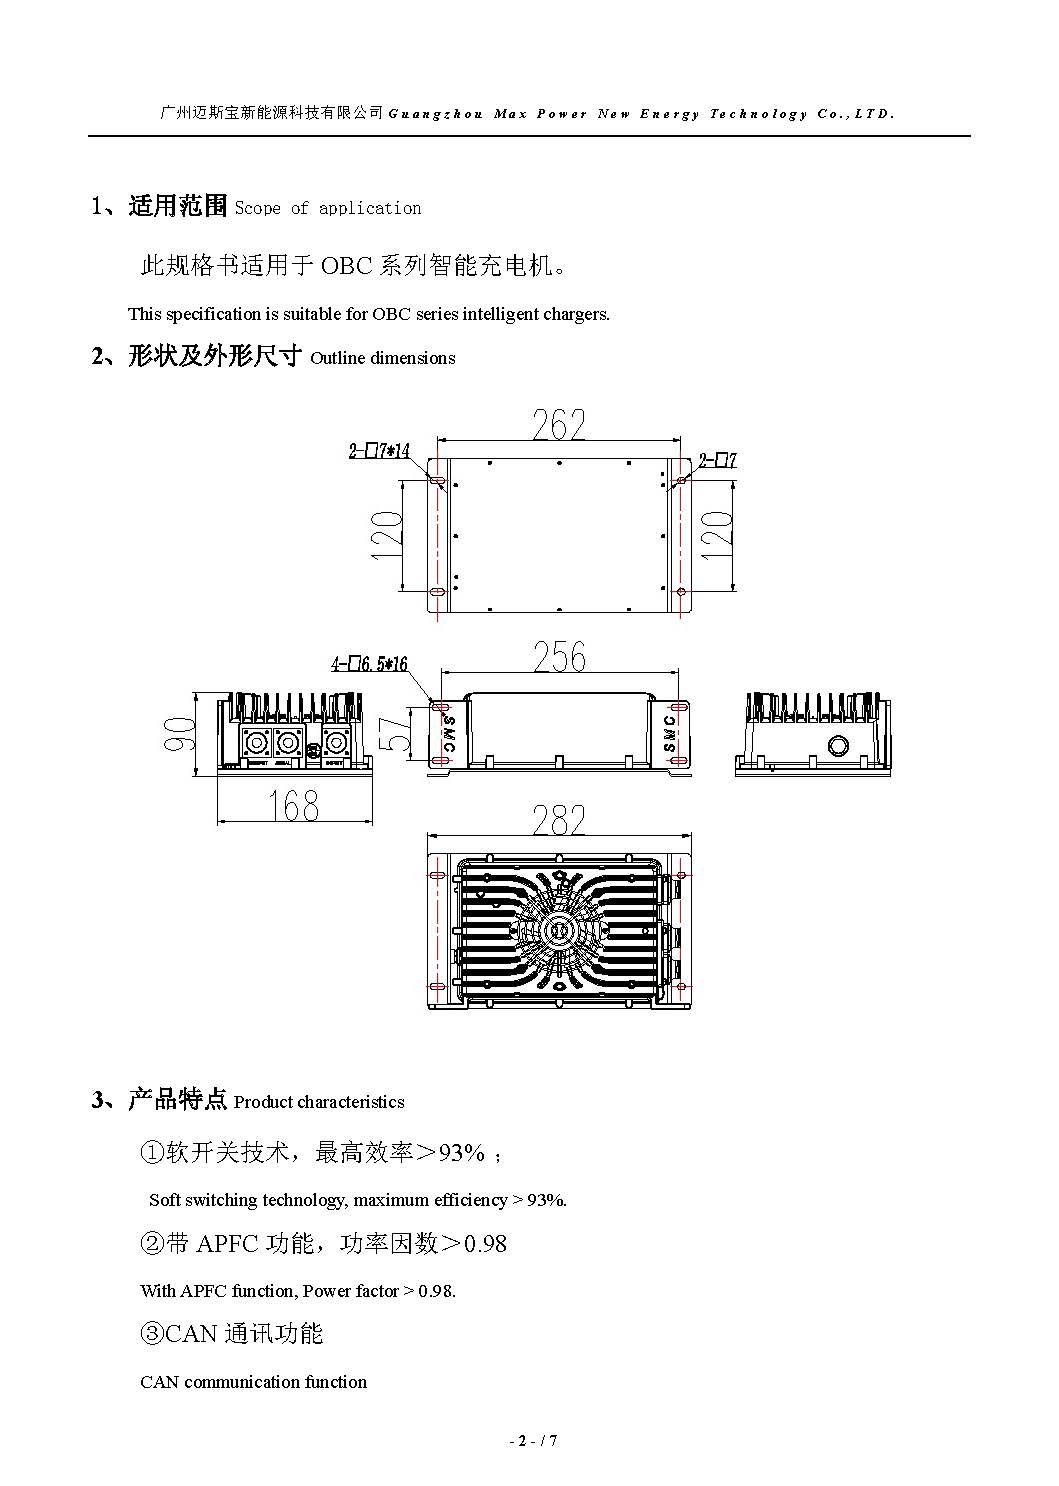 OBC4830_product specification_V1.0_0117_2021_页面_2.jpg